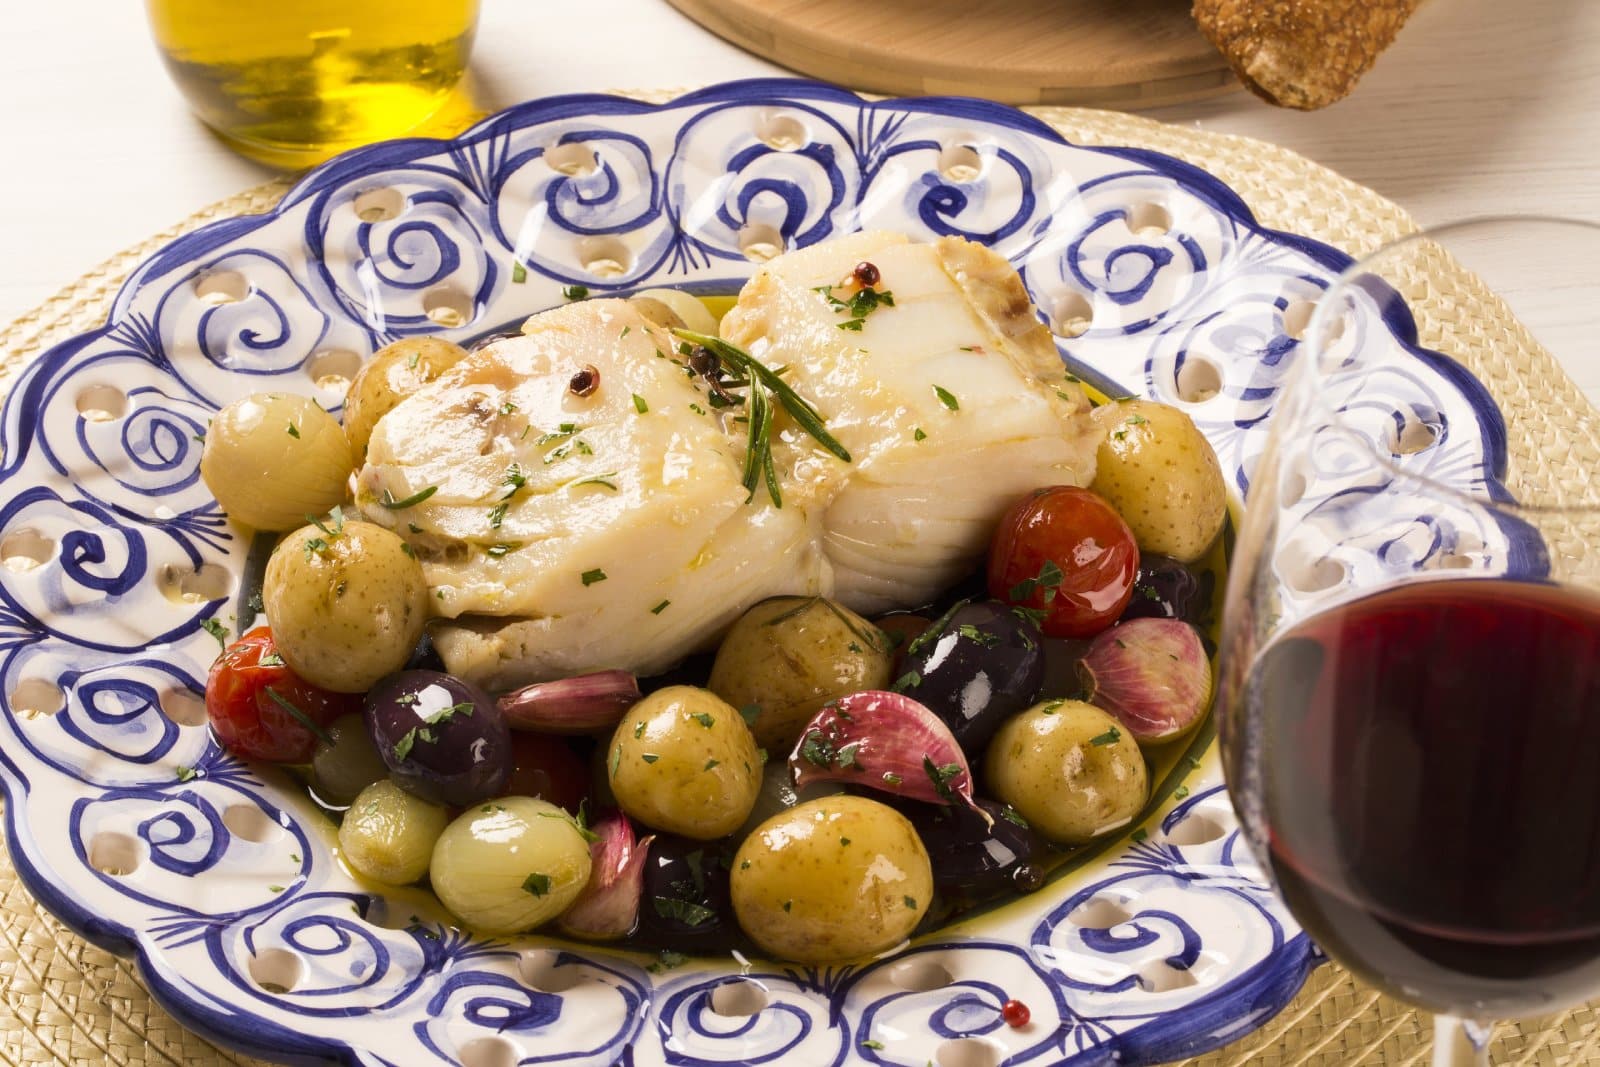 <p class="wp-caption-text">Image Credit: Shutterstock / Paulo Vilela</p>  <p><span>Portuguese cuisine is rich in seafood, meats, and spices, reflecting its maritime history and global explorations. Iconic dishes include Bacalhau, salt cod, prepared in countless ways, and Pastéis de Nata, custard tarts. The cuisine emphasizes simple preparations with high-quality ingredients, allowing the flavors to shine.</span></p>